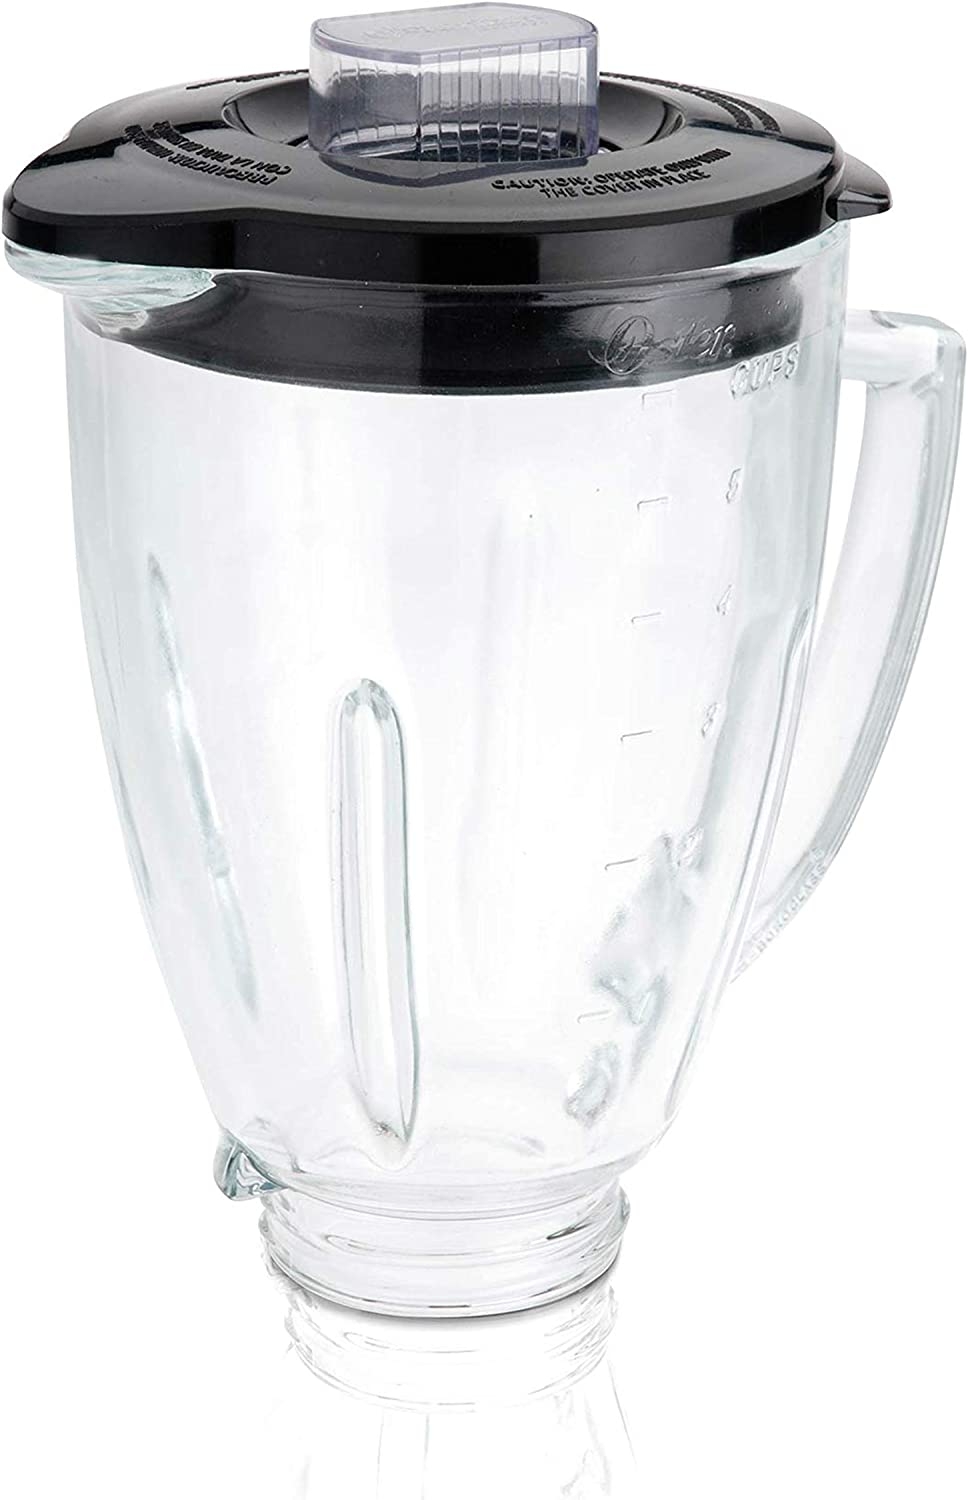 Oster Blender 6-Cup Glass Jar, Lid, Black and clear Import To Shop ×Product customization General Description Gallery Reviews